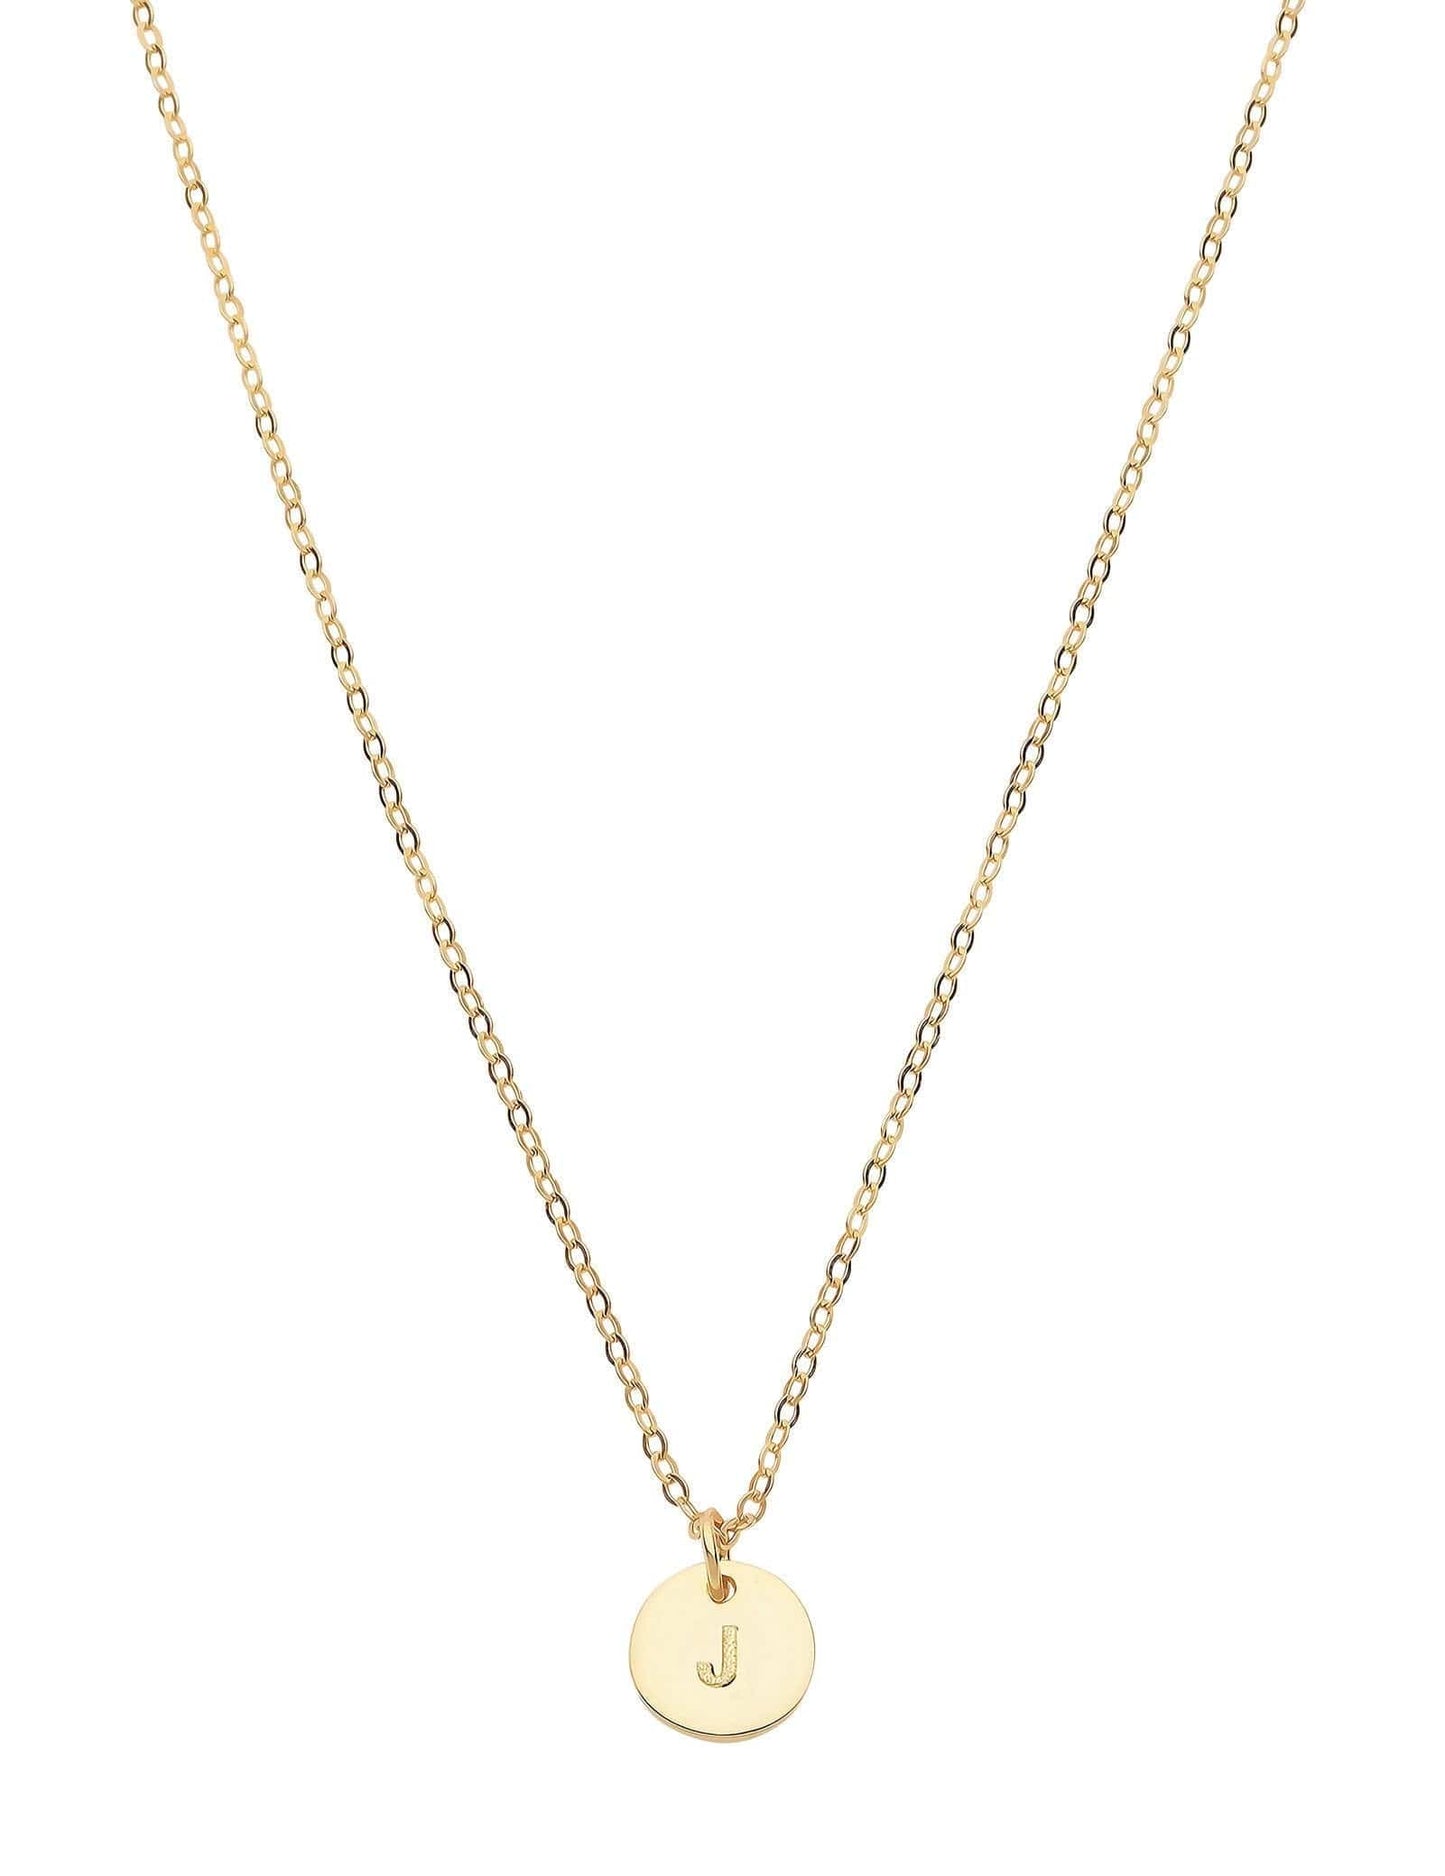 Dear Addison Yellow Gold Letter J Necklace